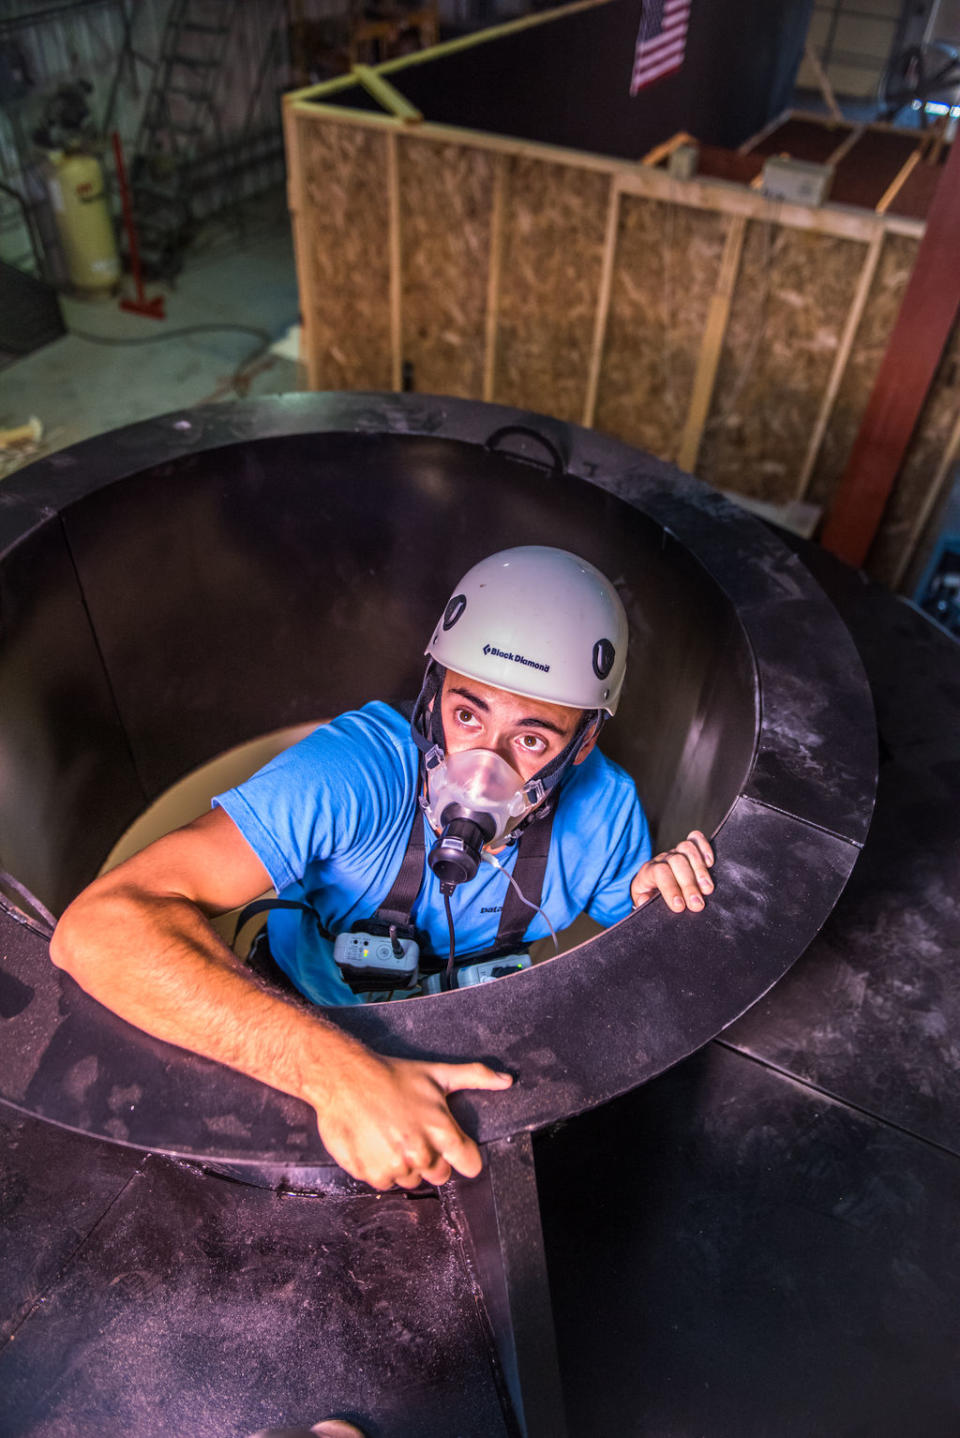 Garret Lovoy, studying nutrition and kinesiology during his senior year at Kansas State University, climbs out of a replica Orion space capsule used to test potential astronauts' health during an emergency escape. <cite>Kansas State University</cite>